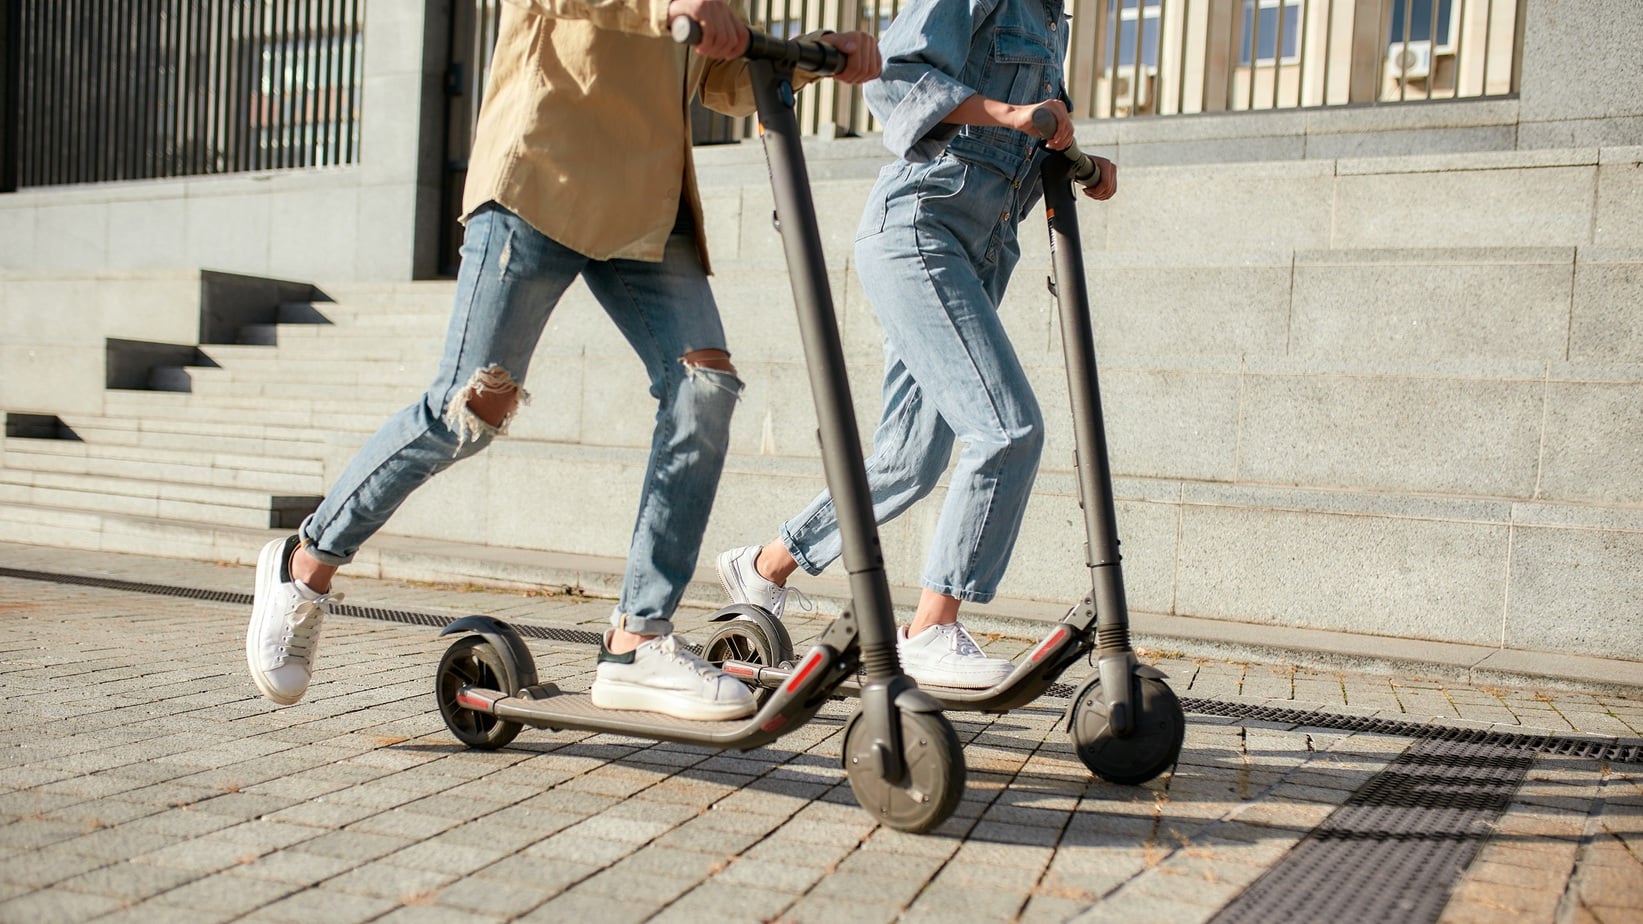 Scooters are still in vogue. What should you consider when choosing a model for yourself?